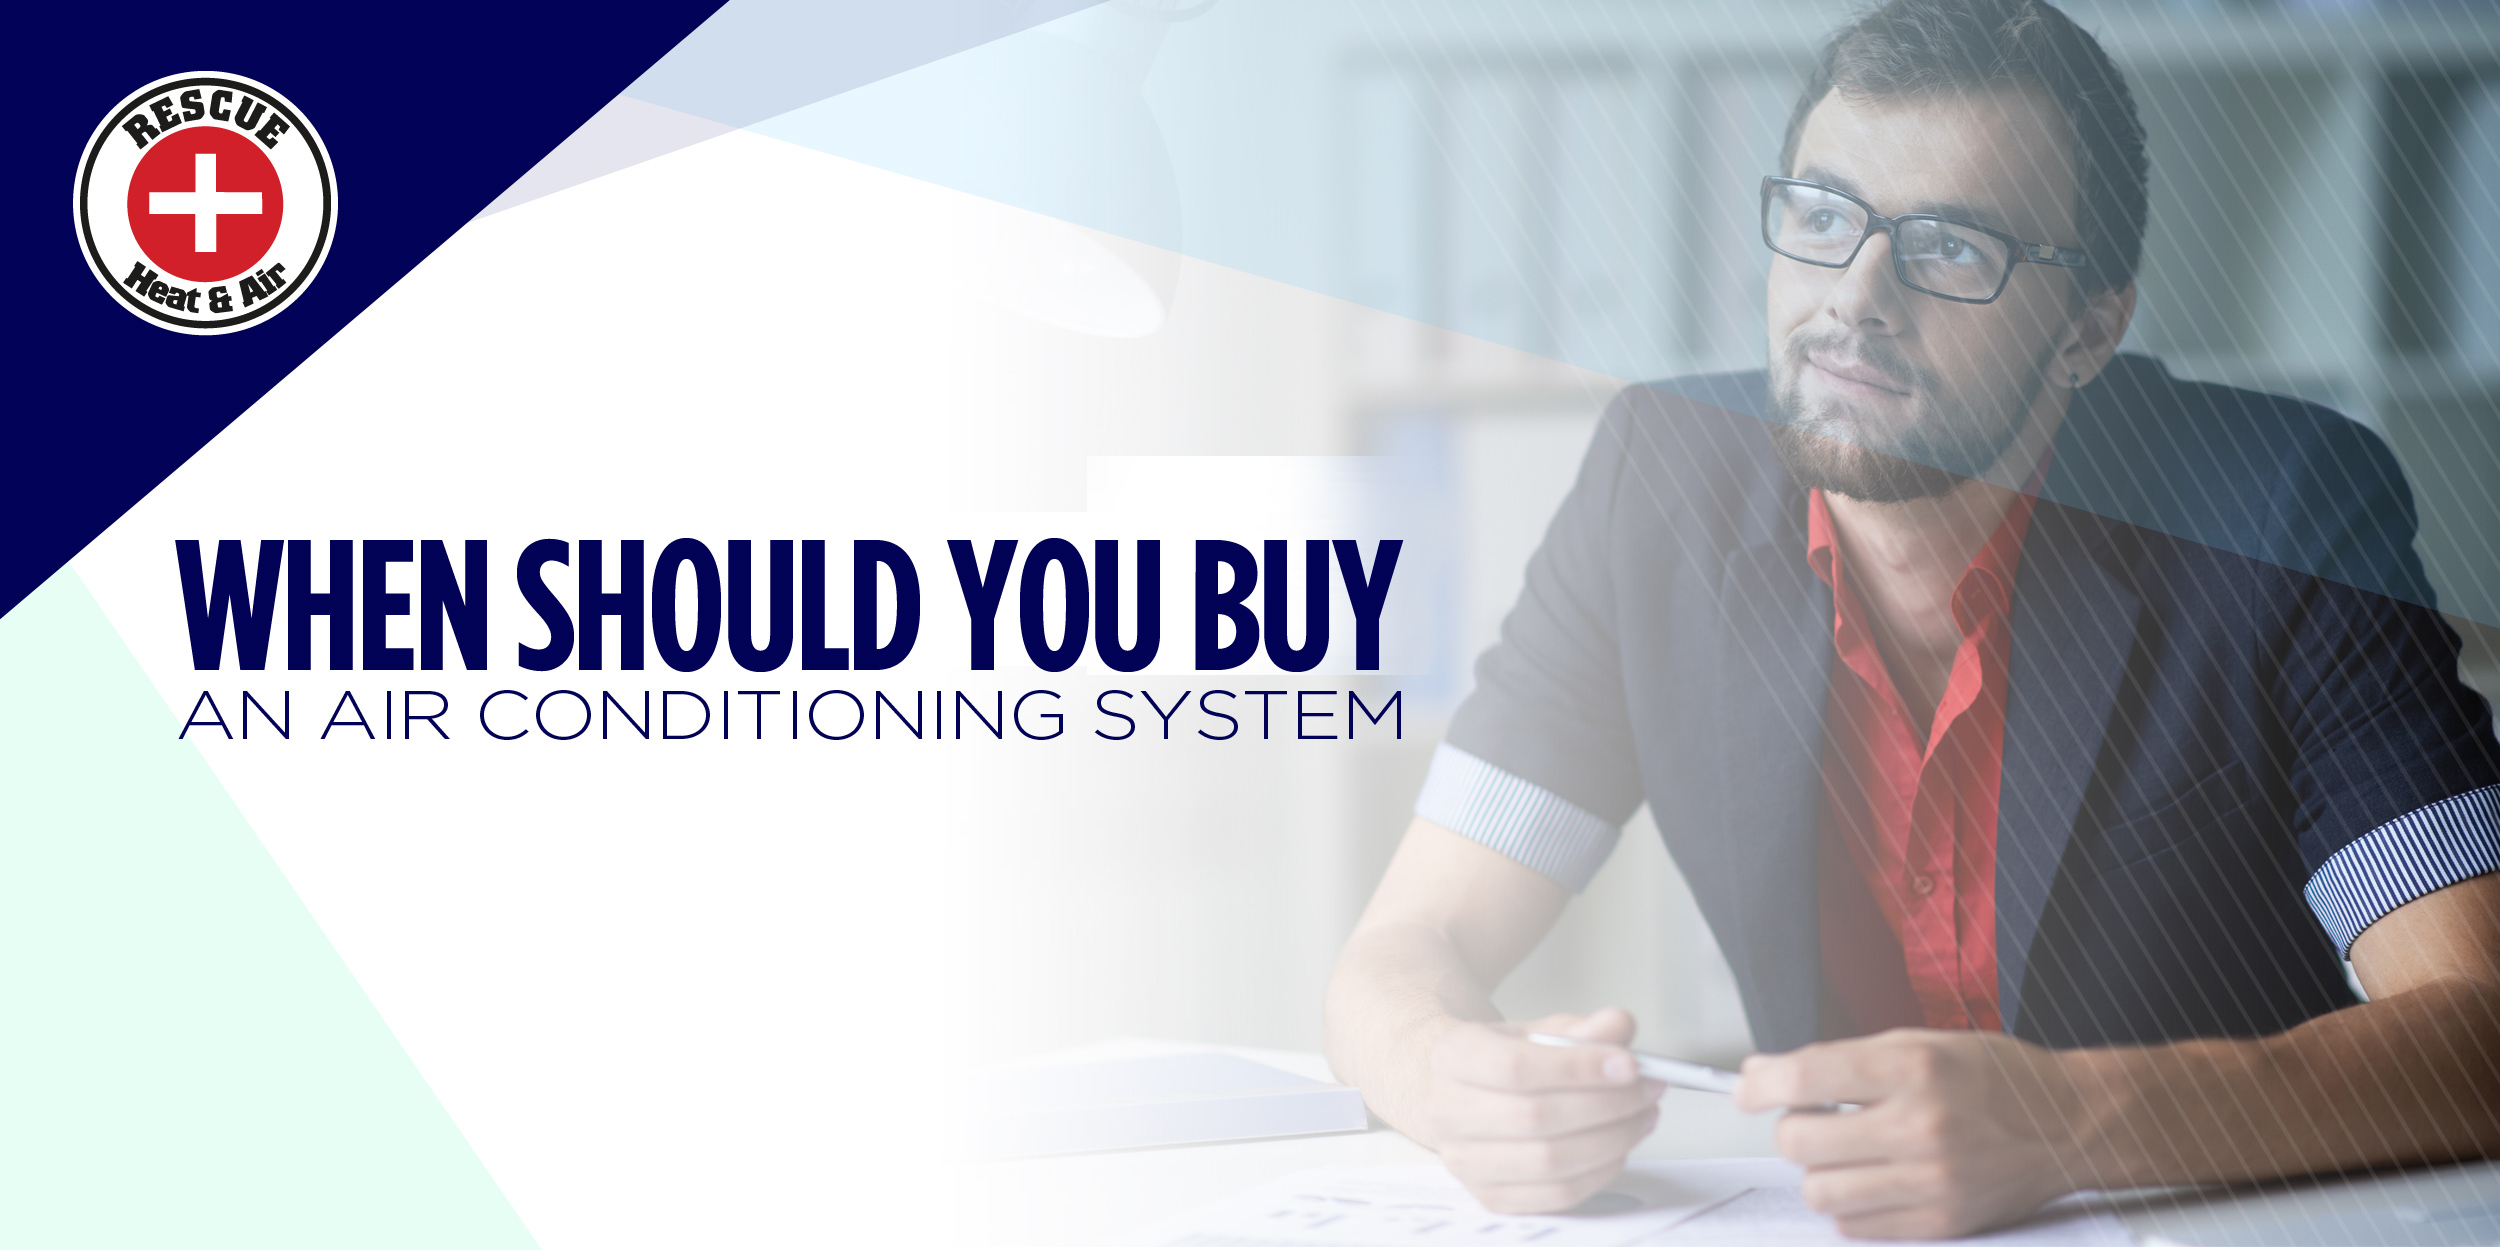 When Should You Buy an Air Conditioning System?